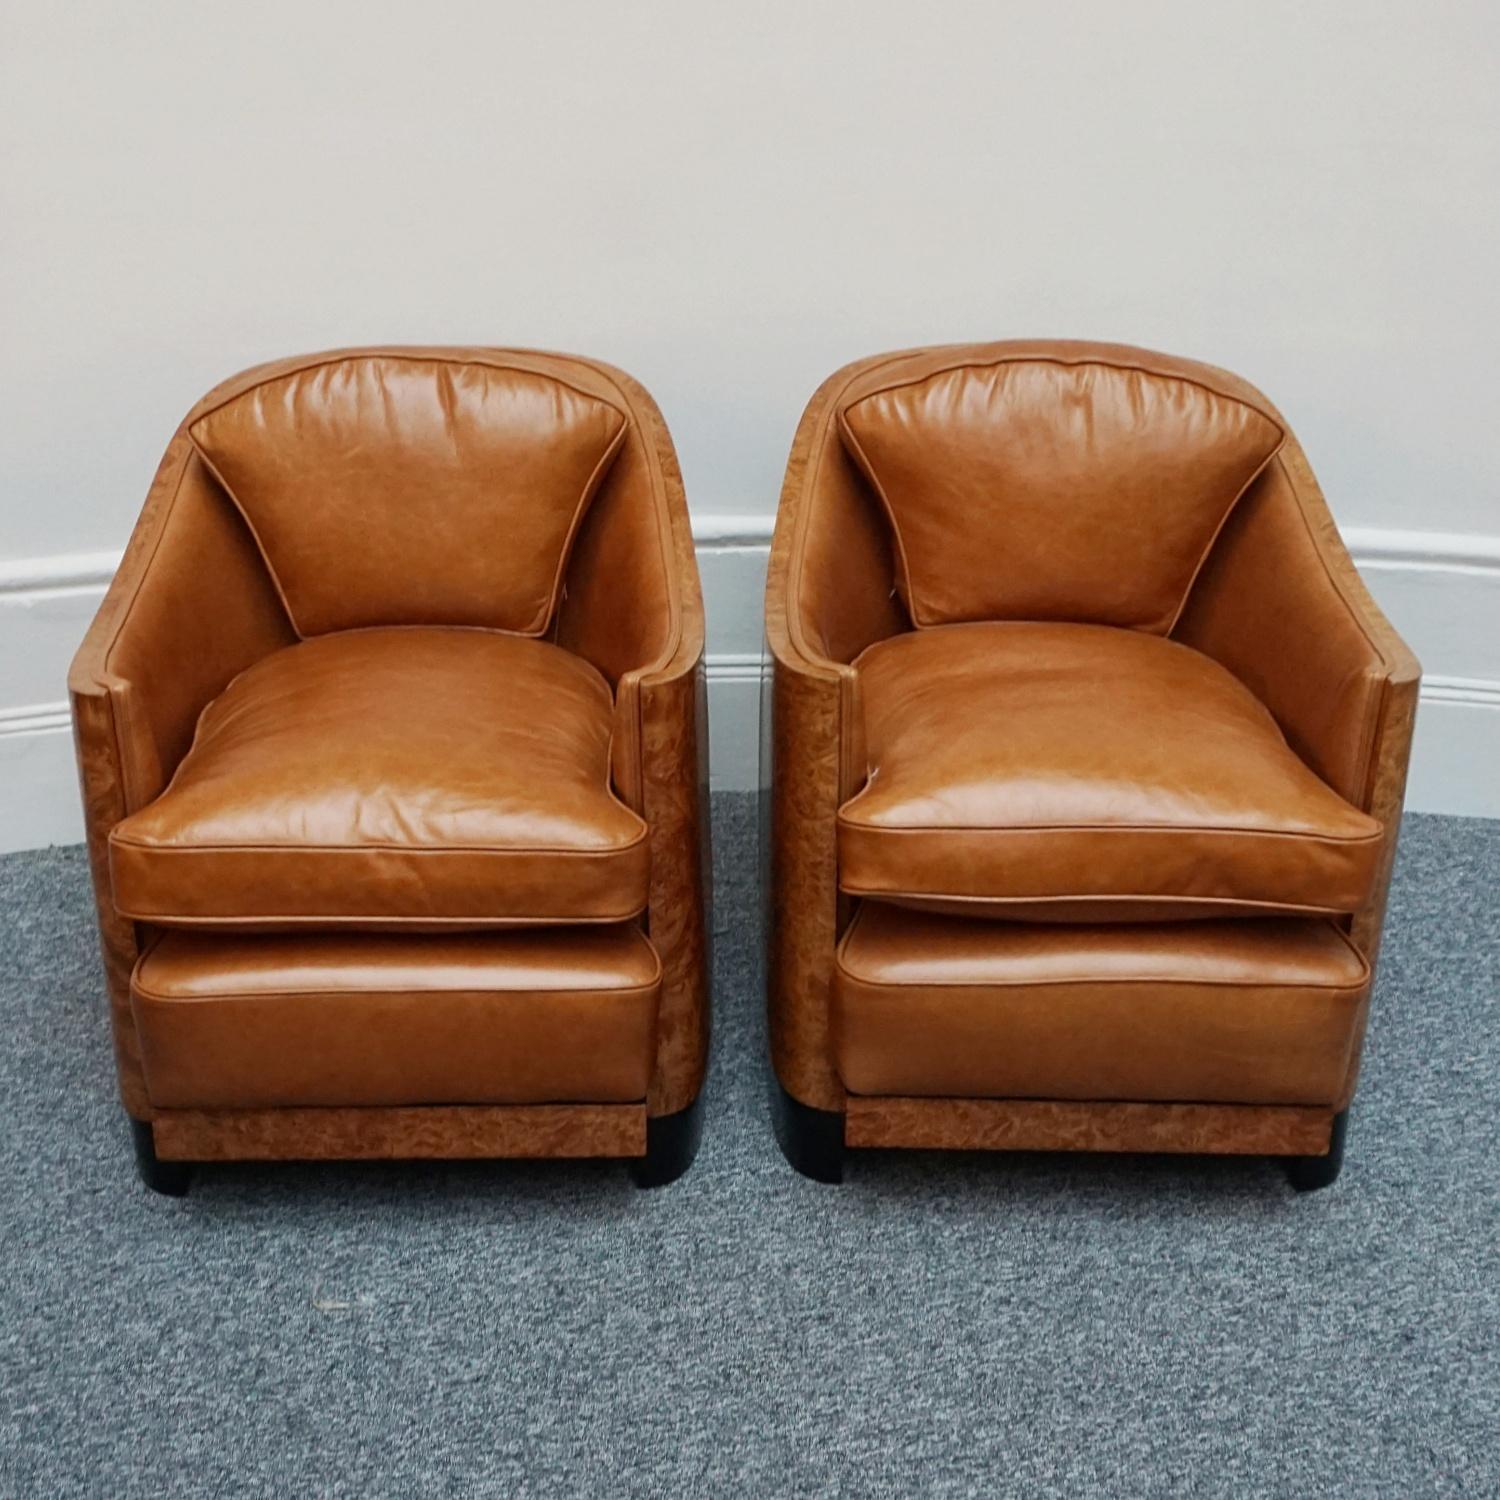 Original 1930s English Art Deco Club Chairs Walnut and Brown Leather 7